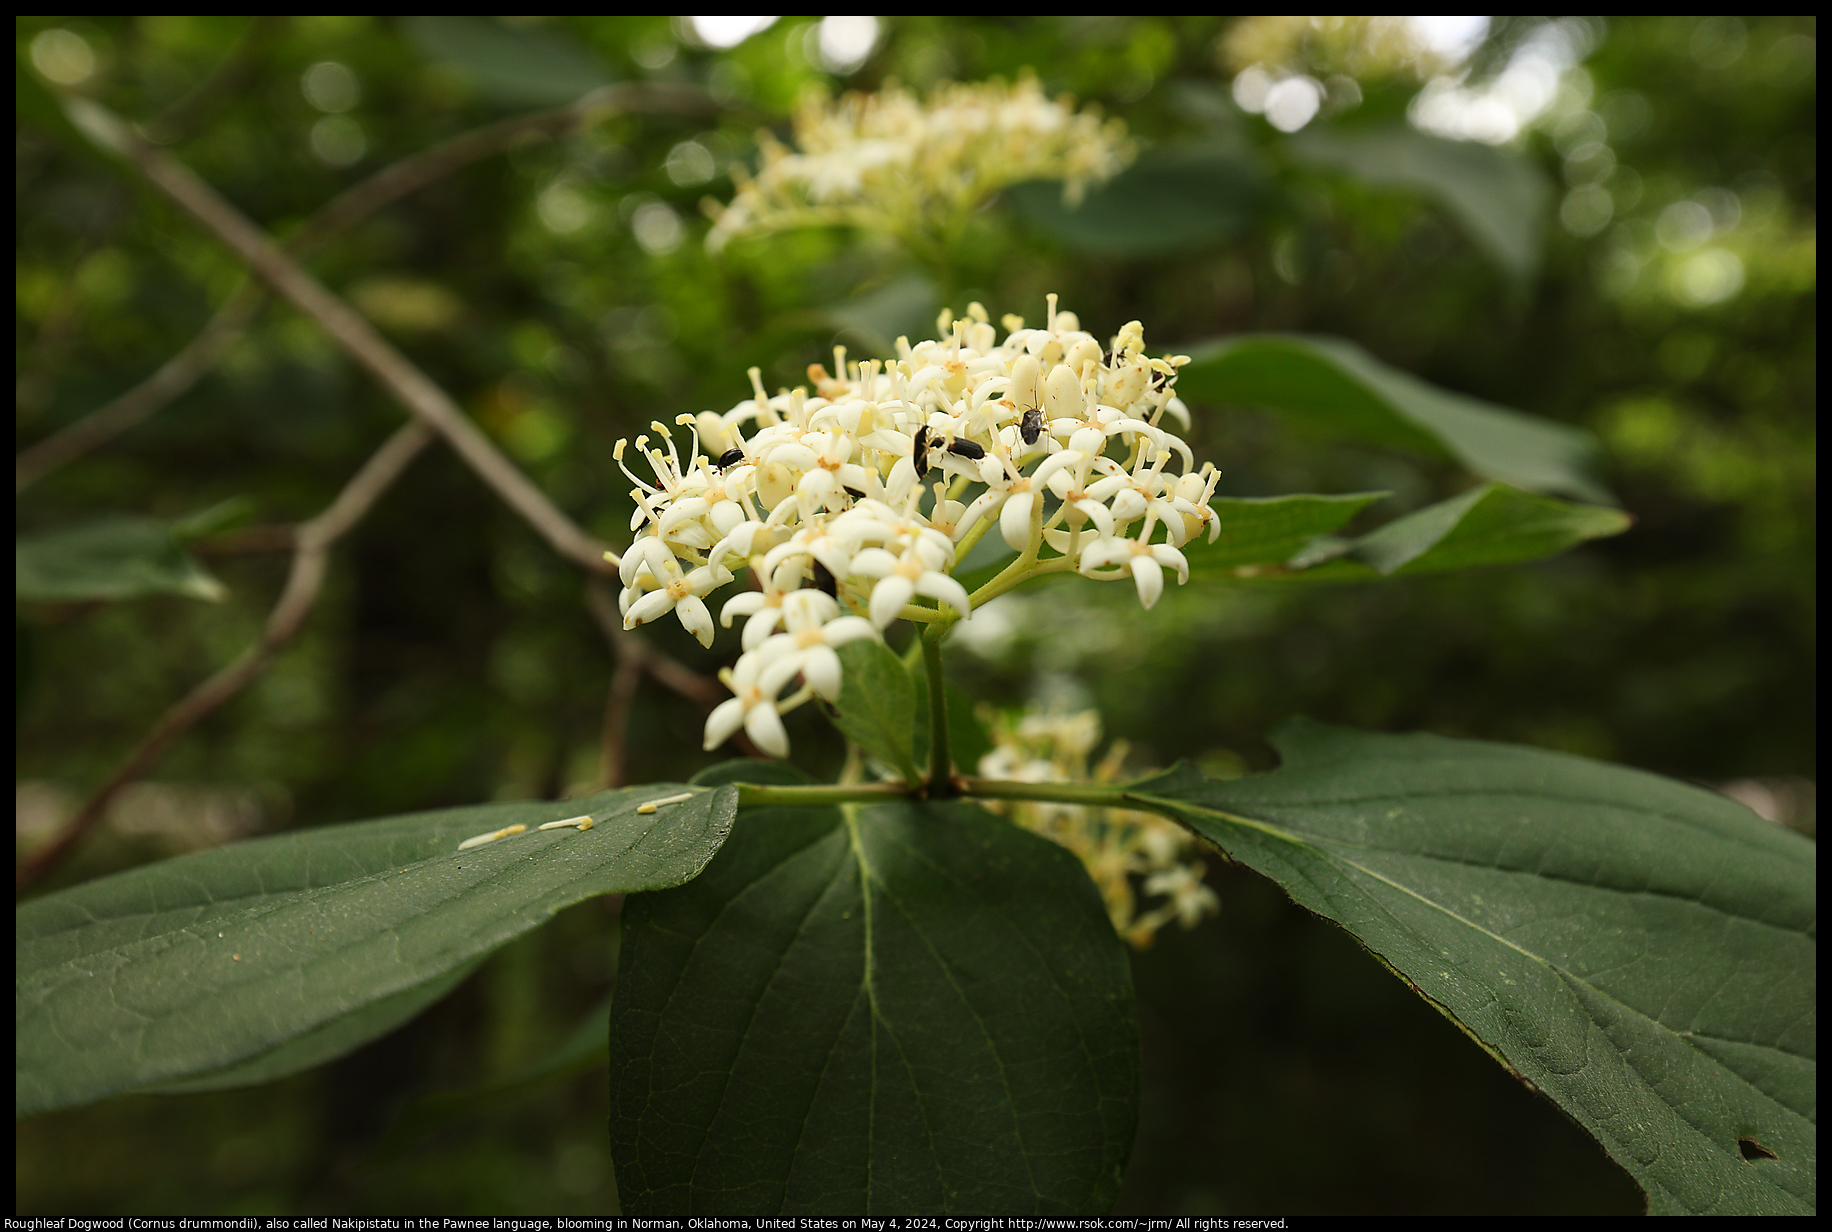 Roughleaf Dogwood (Cornus drummondii), also called Nakipistatu in the Pawnee language, blooming in Norman, Oklahoma, United States on May 4, 2024